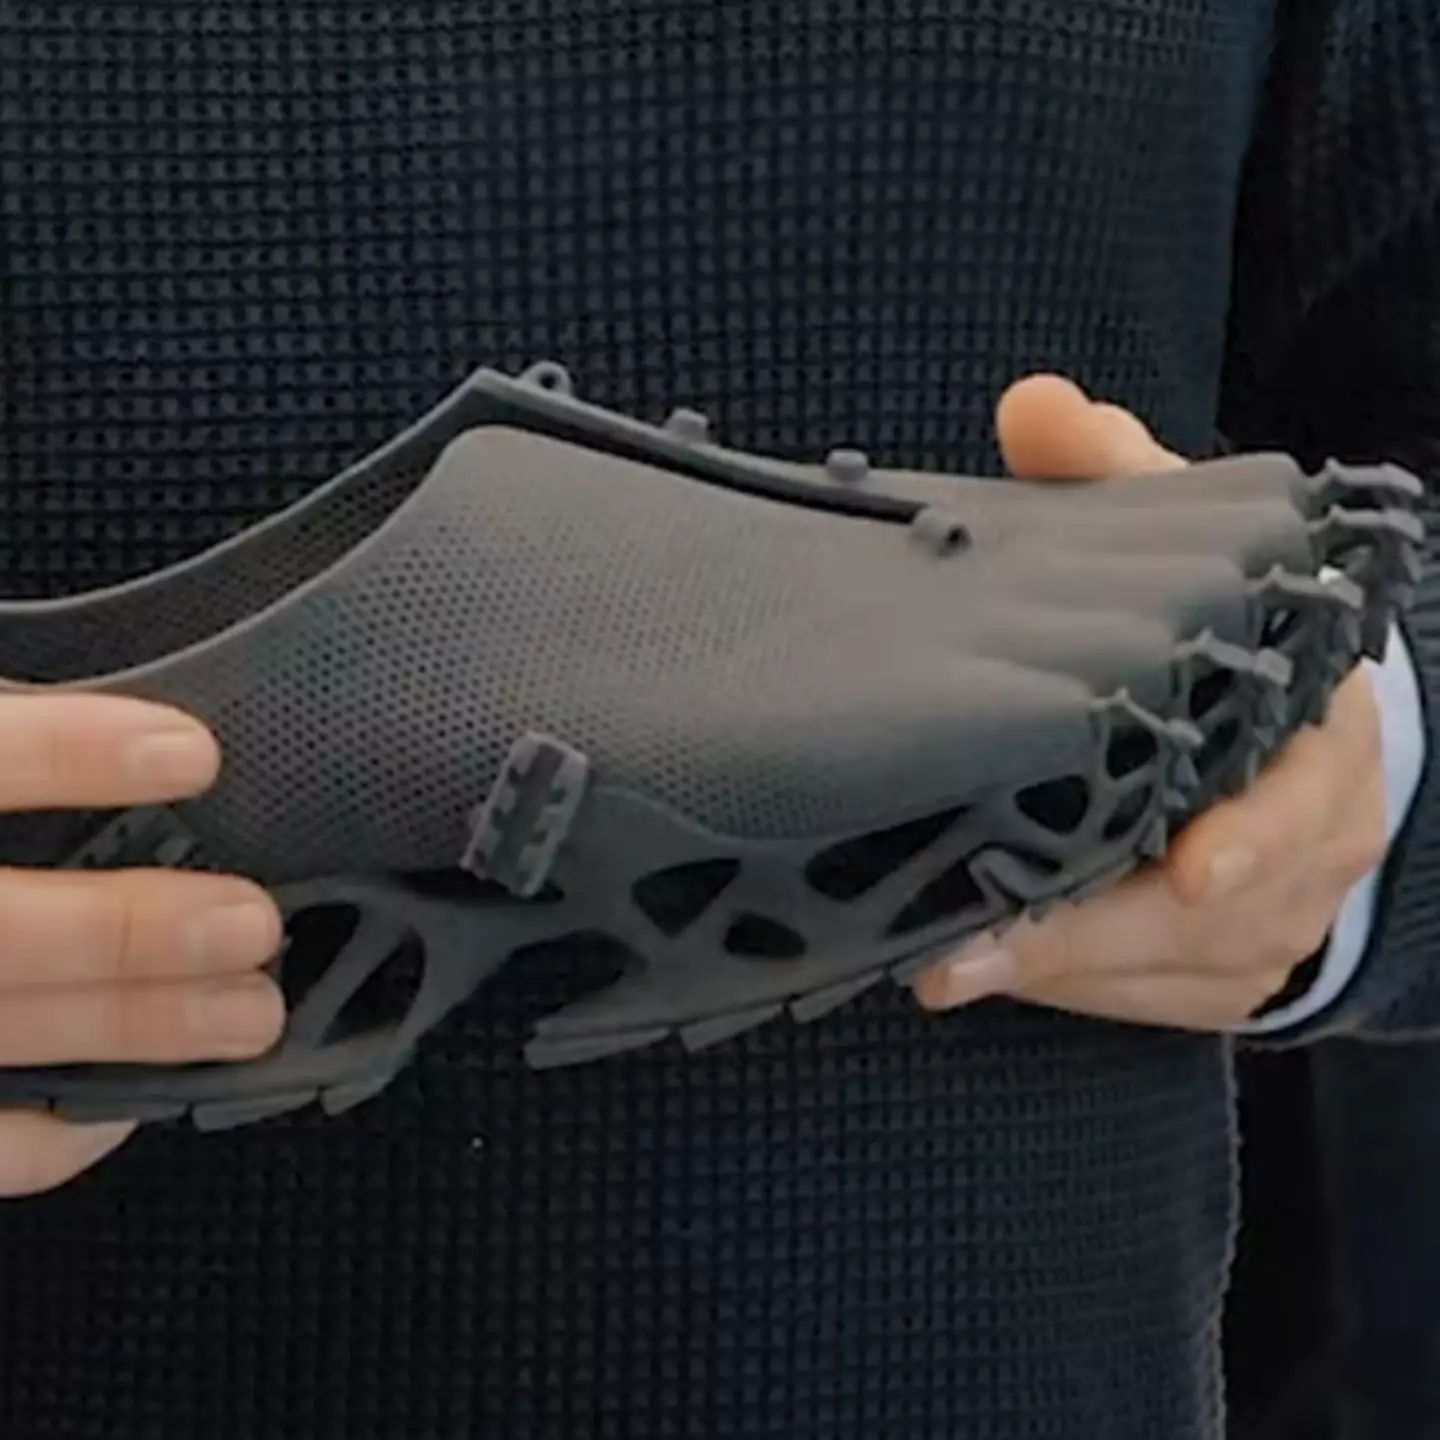 3D printed shoe that adapts to wearer's foot has left people divided